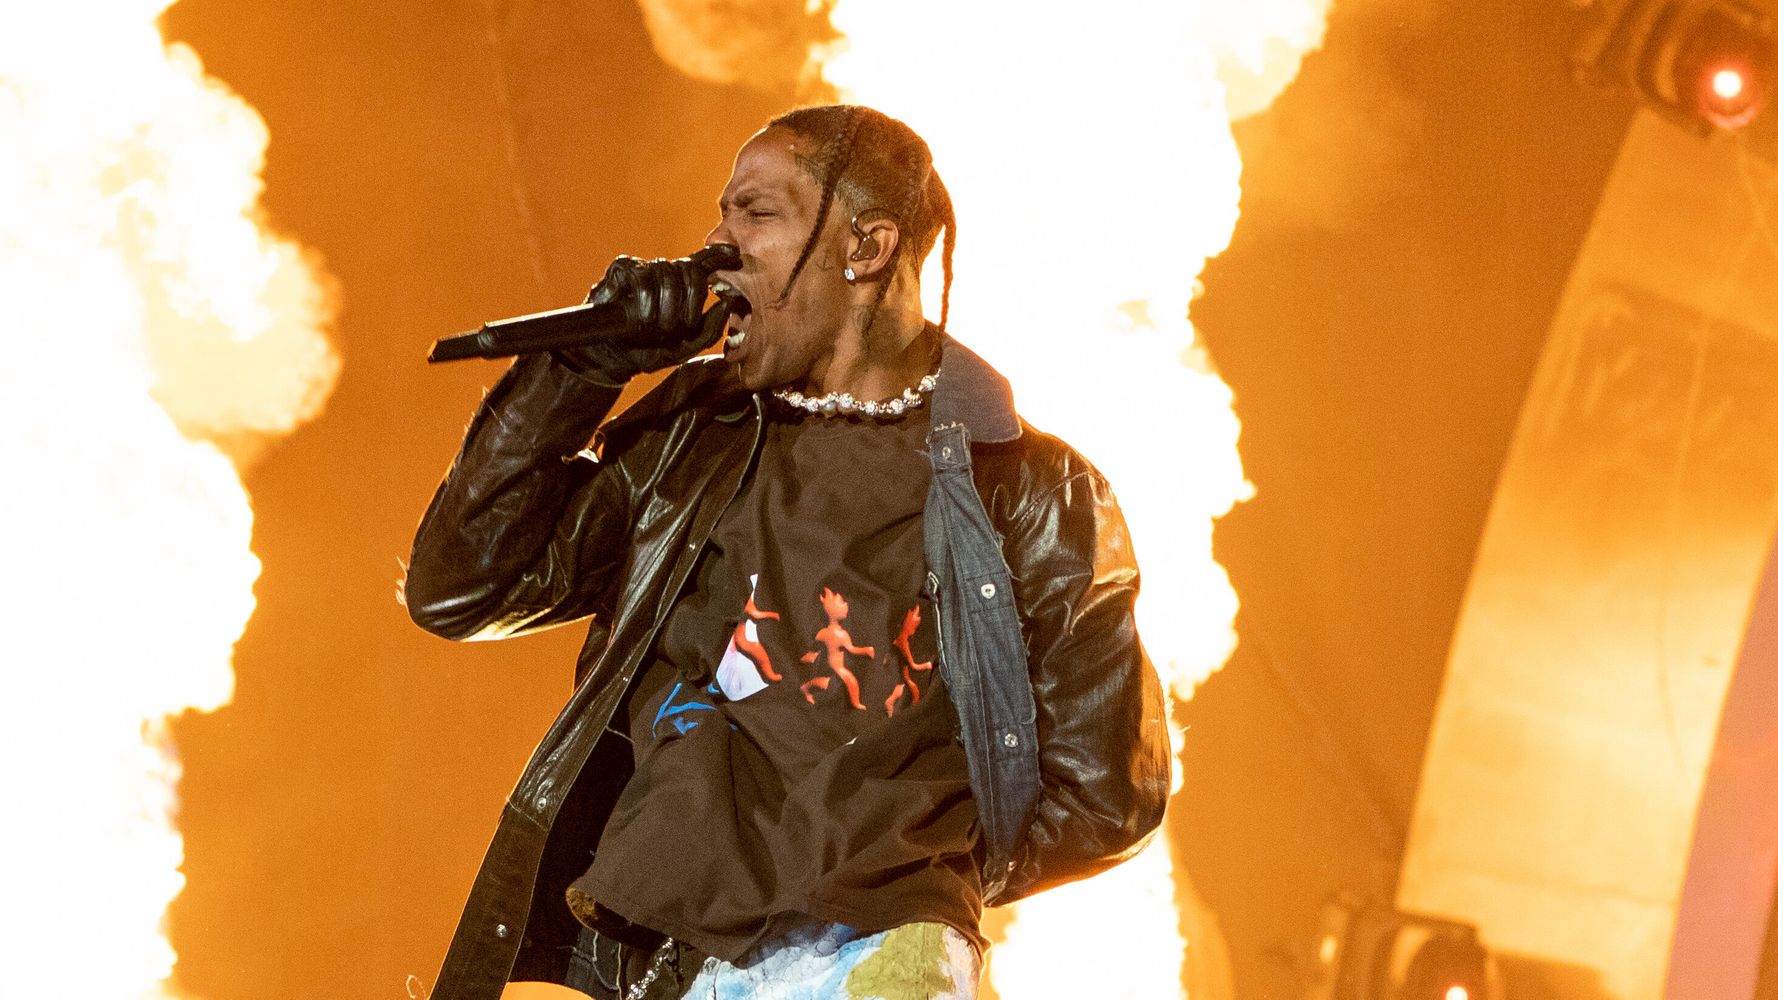 Woman who says she miscarried at Astroworld Fest files lawsuit against Travis Scott